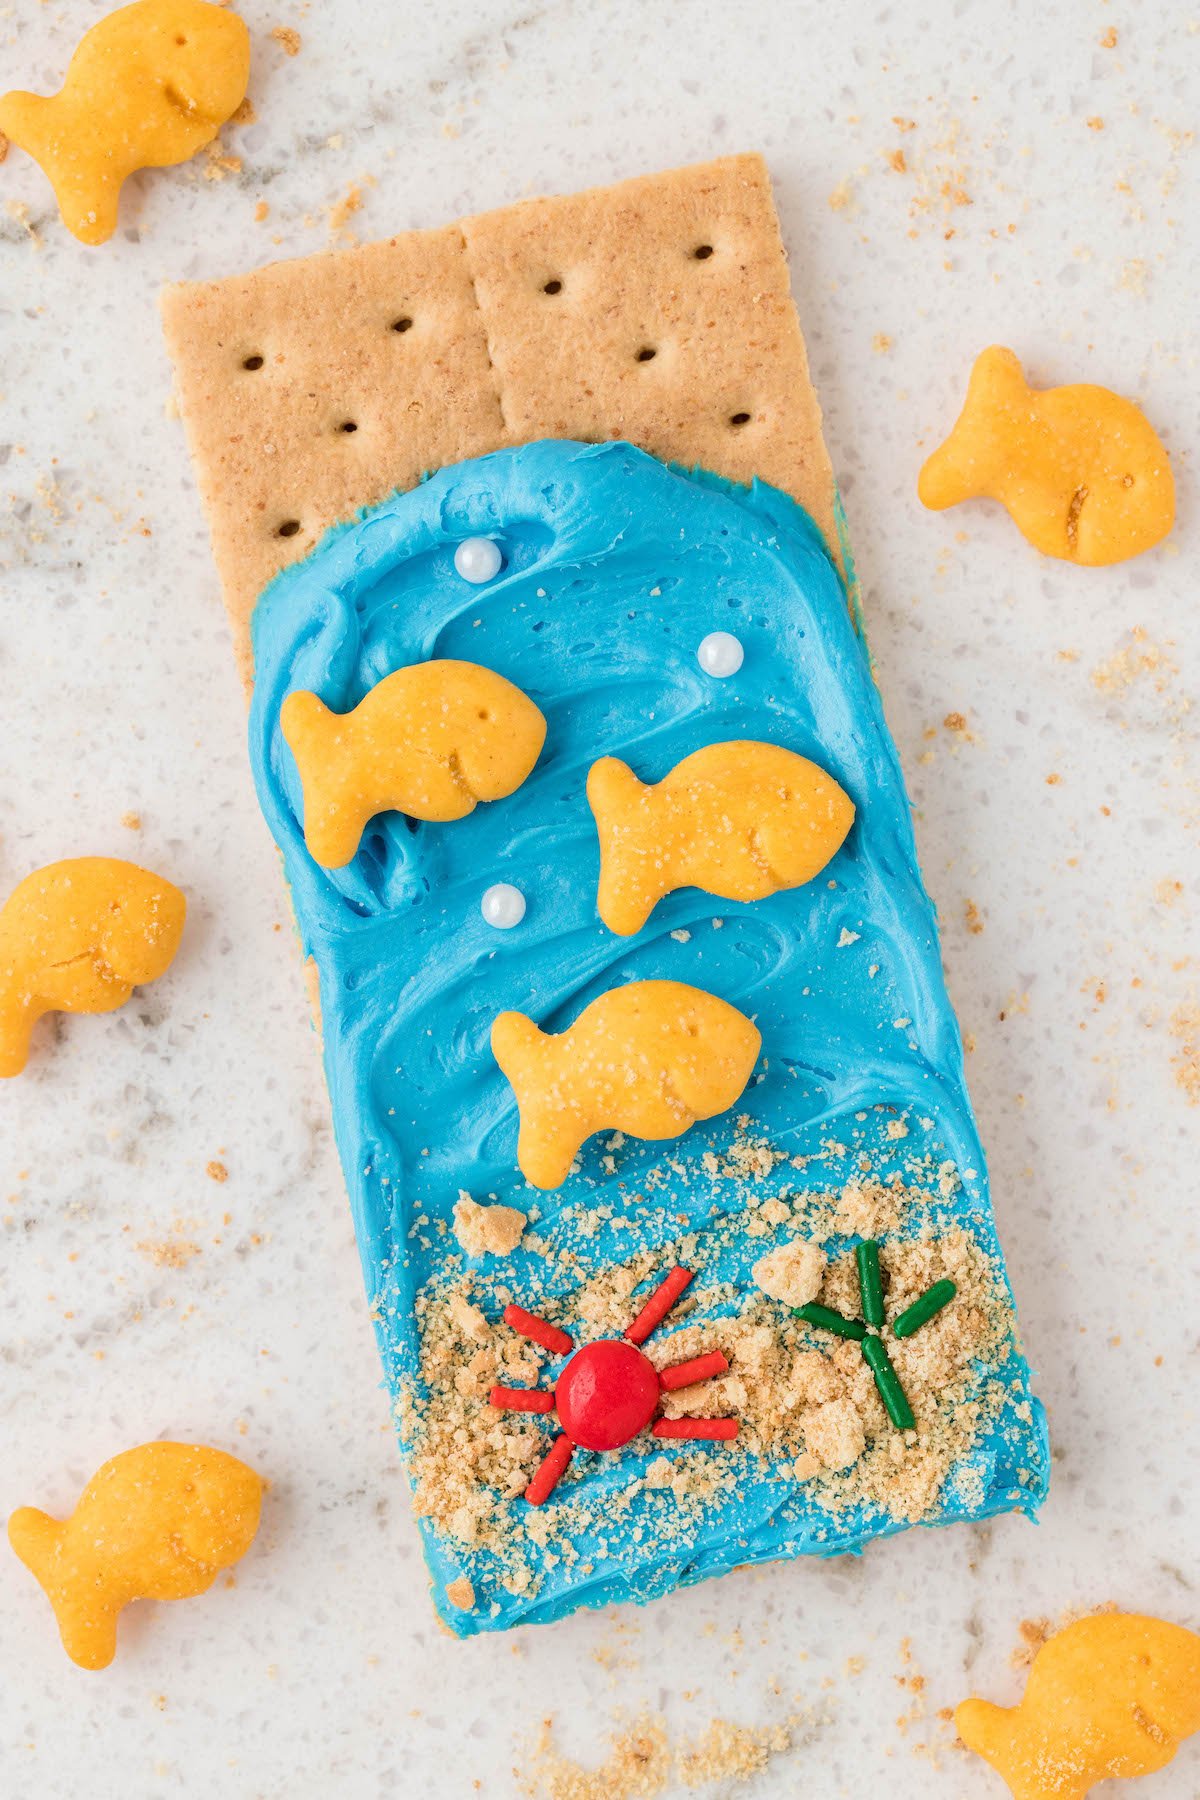 ocean graham cracker with blue frosting, fish crackers and sprinkles.